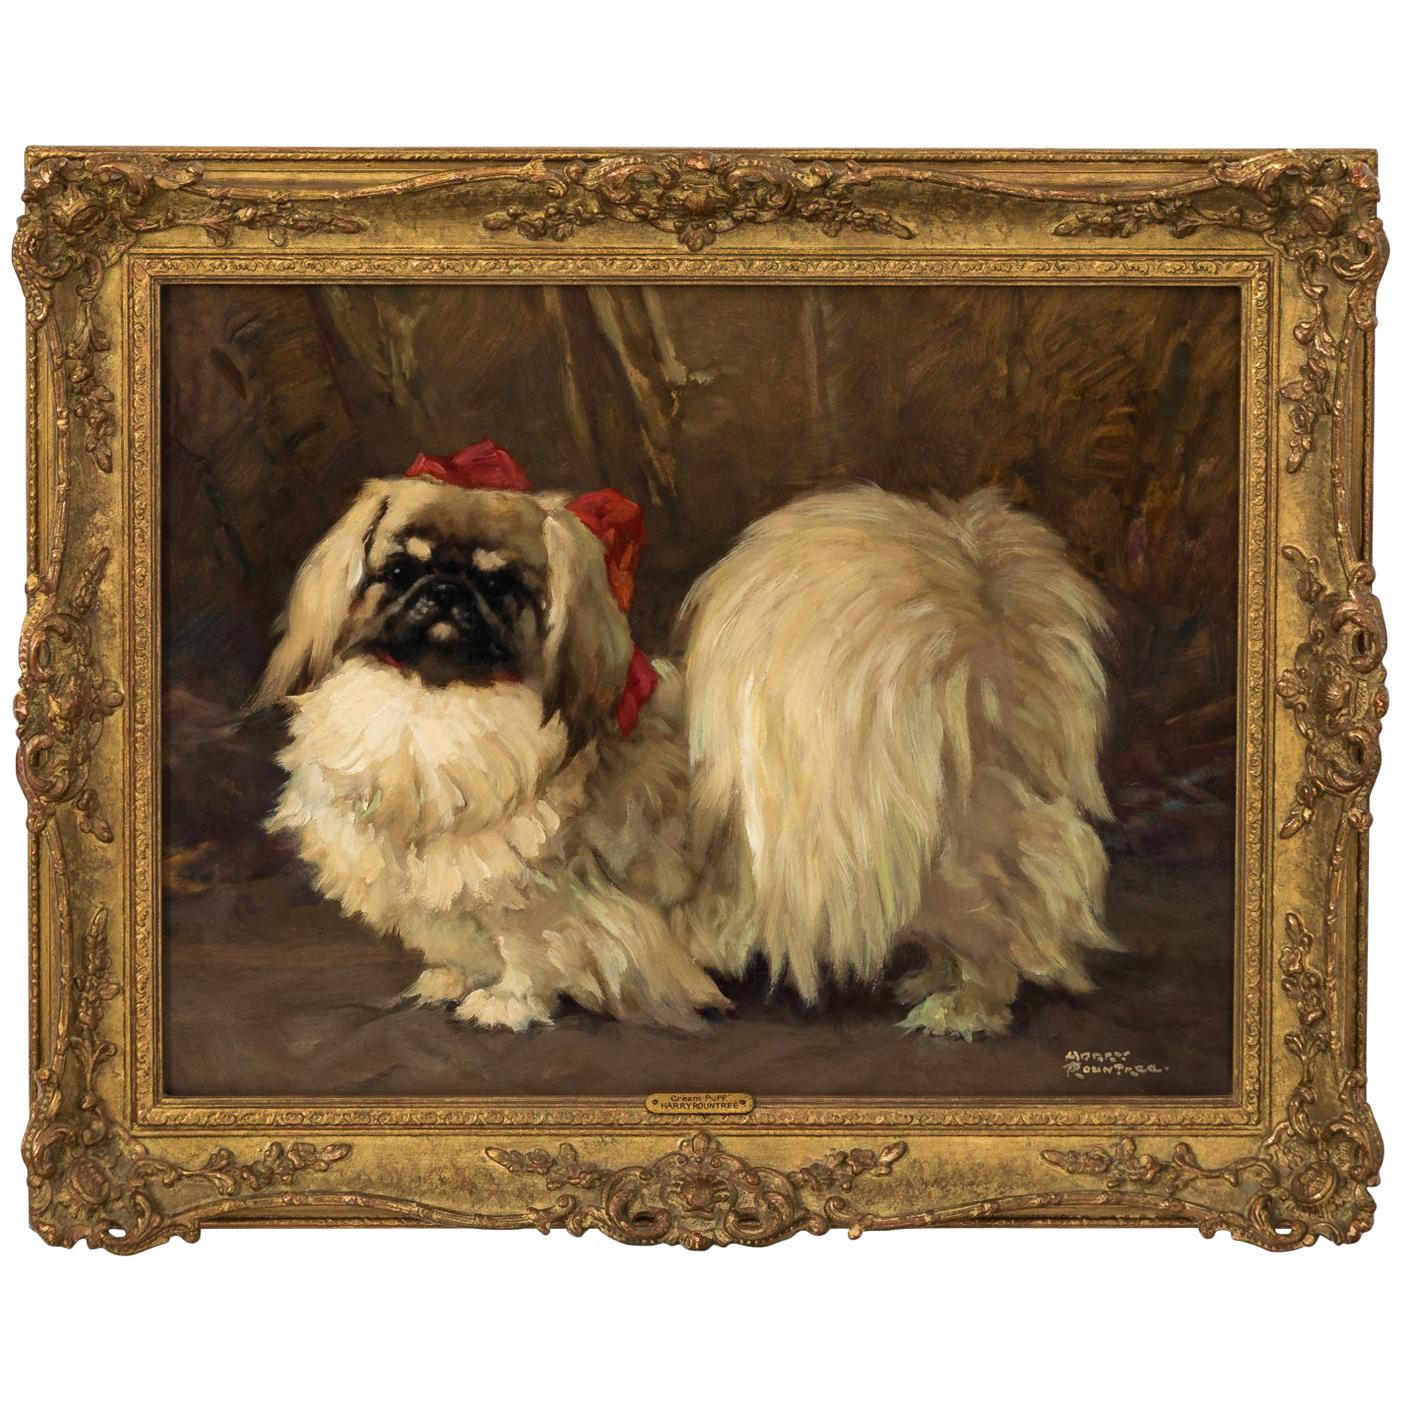 Oil on Canvas of Dog by Harry Roundtree, circa 1930